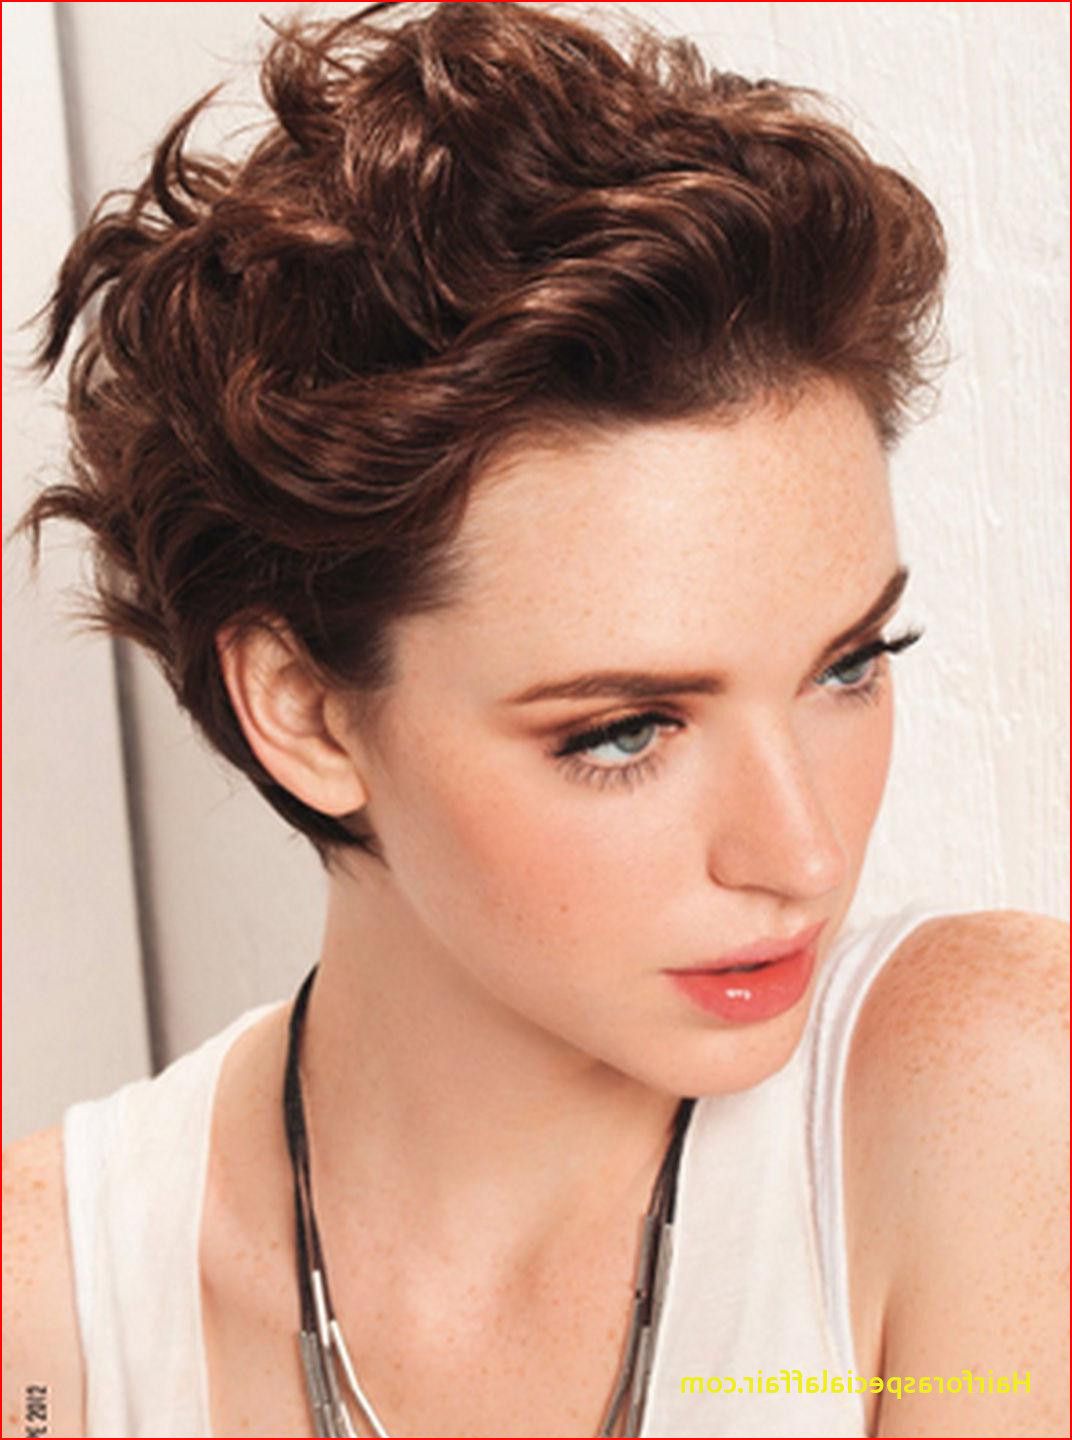 Short Haircuts For Women With Thick Wavy Hair Cute Short Haircuts Inside Short Cuts For Thick Wavy Hair (View 6 of 25)